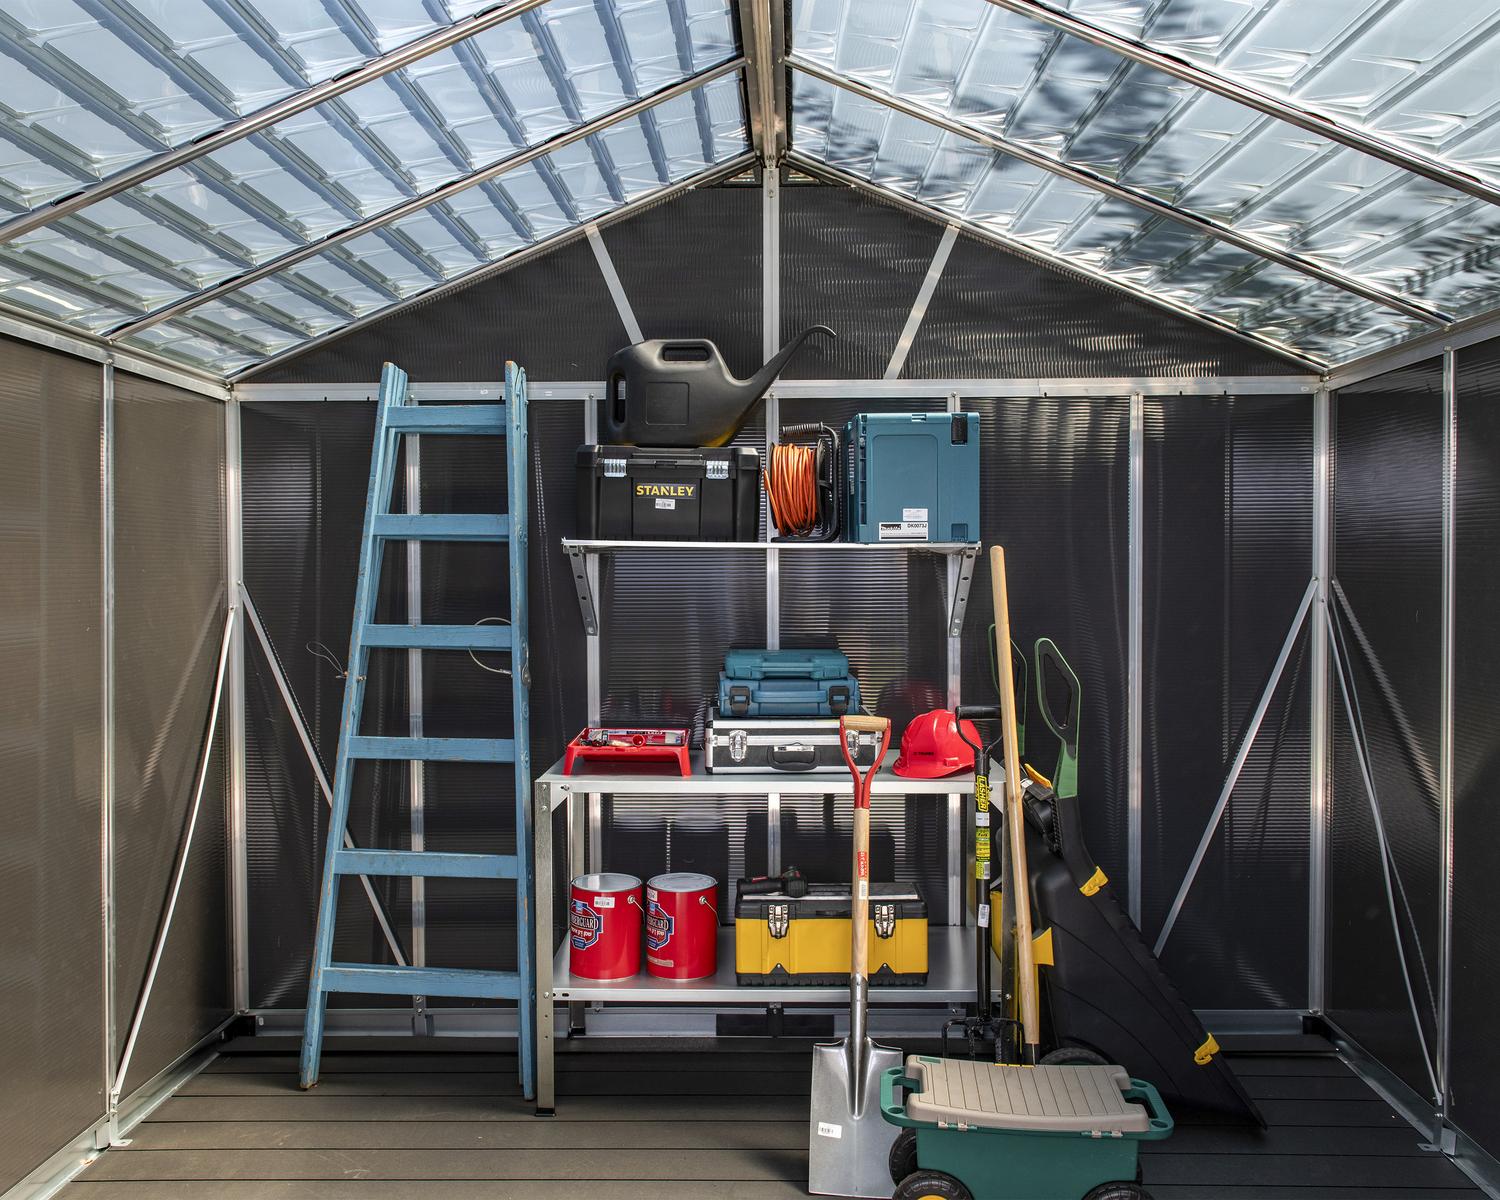 Organizing of tools in large plastic storage shed with a skylight roof